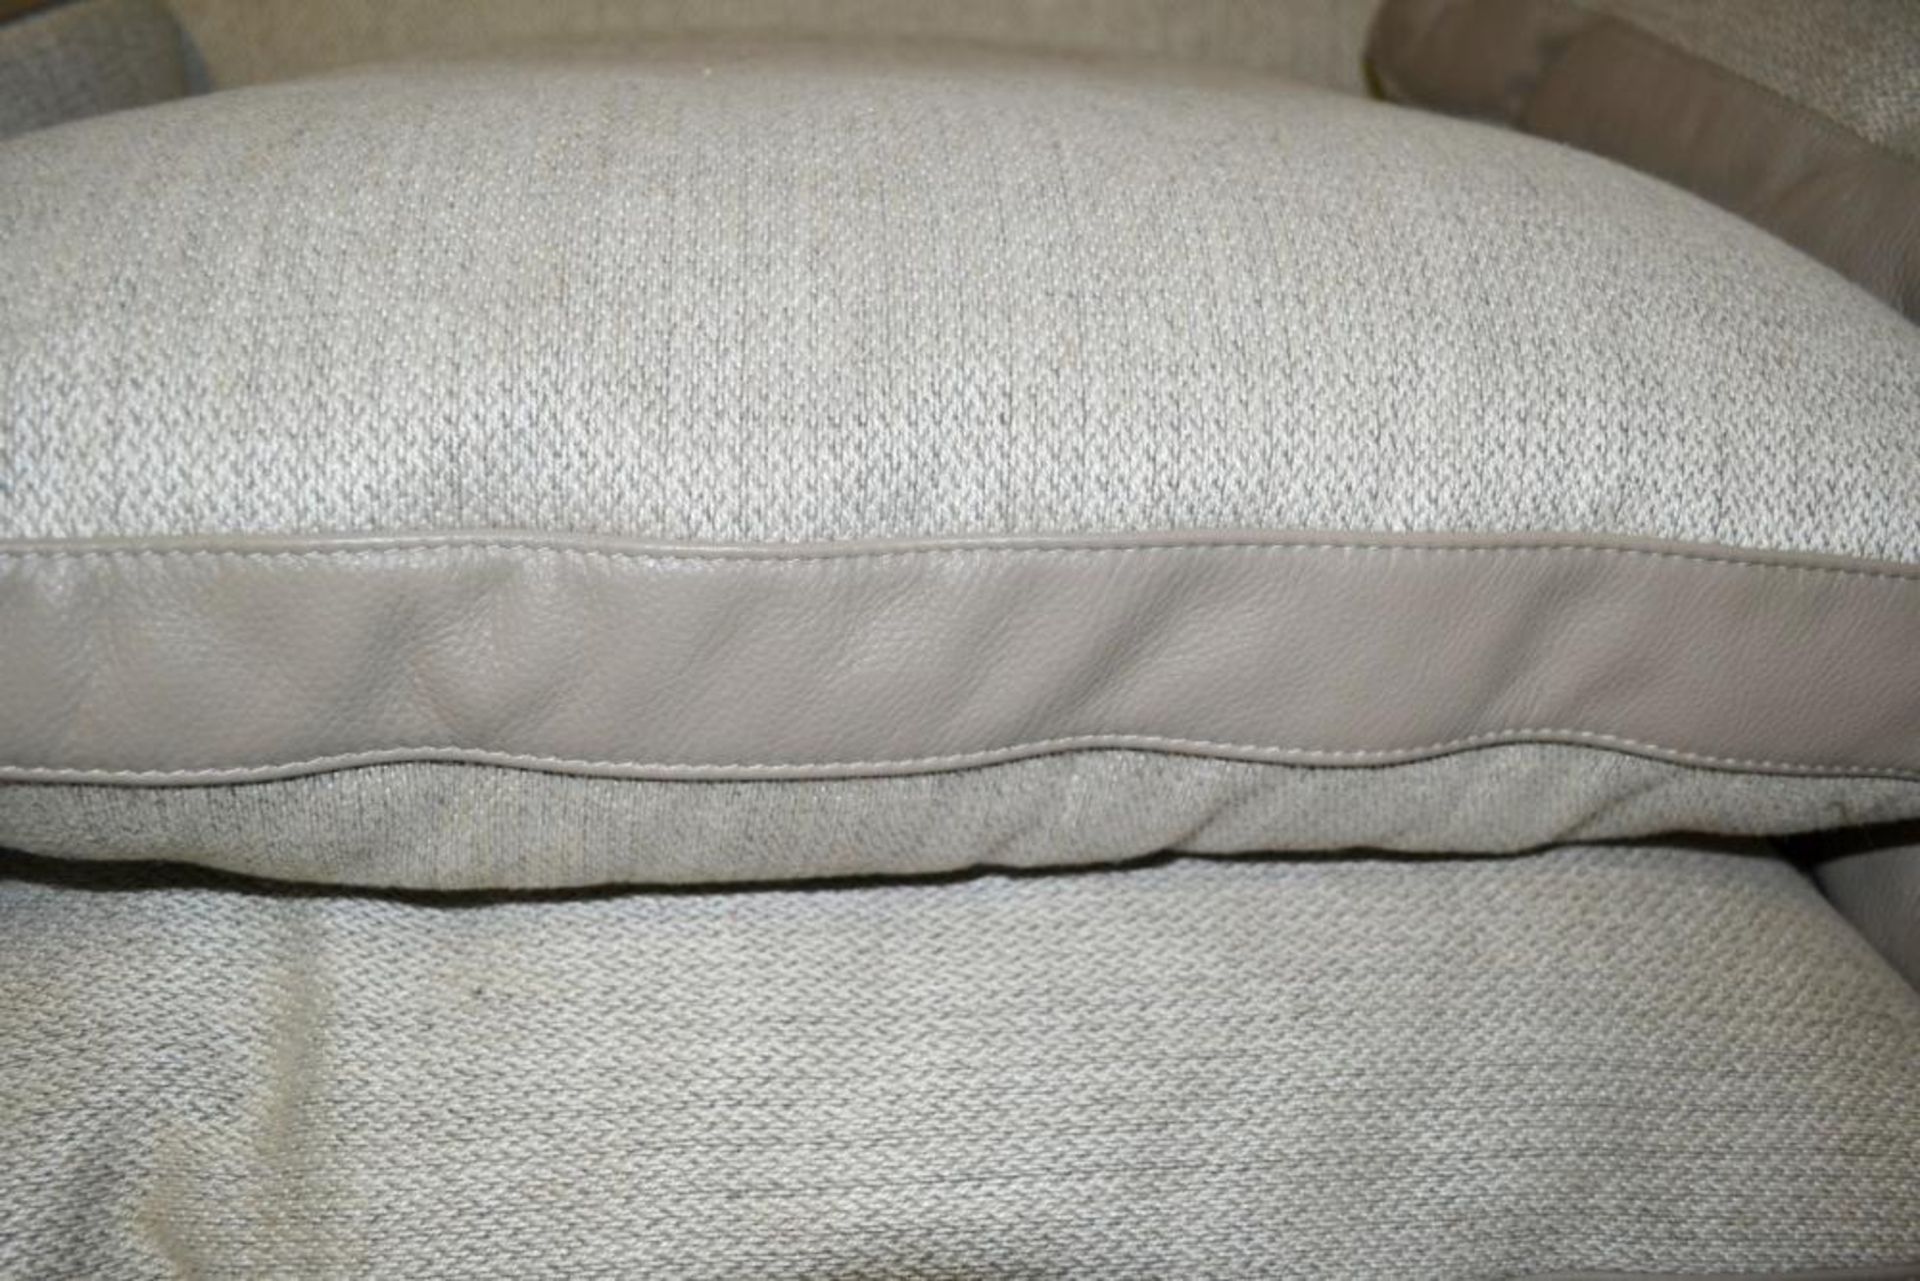 1 x POLTRONA FRAU "Mass Angolo" Large Left-Hand Sofa Element - Richly Upholstered In A Mix Of Fabric - Image 6 of 11